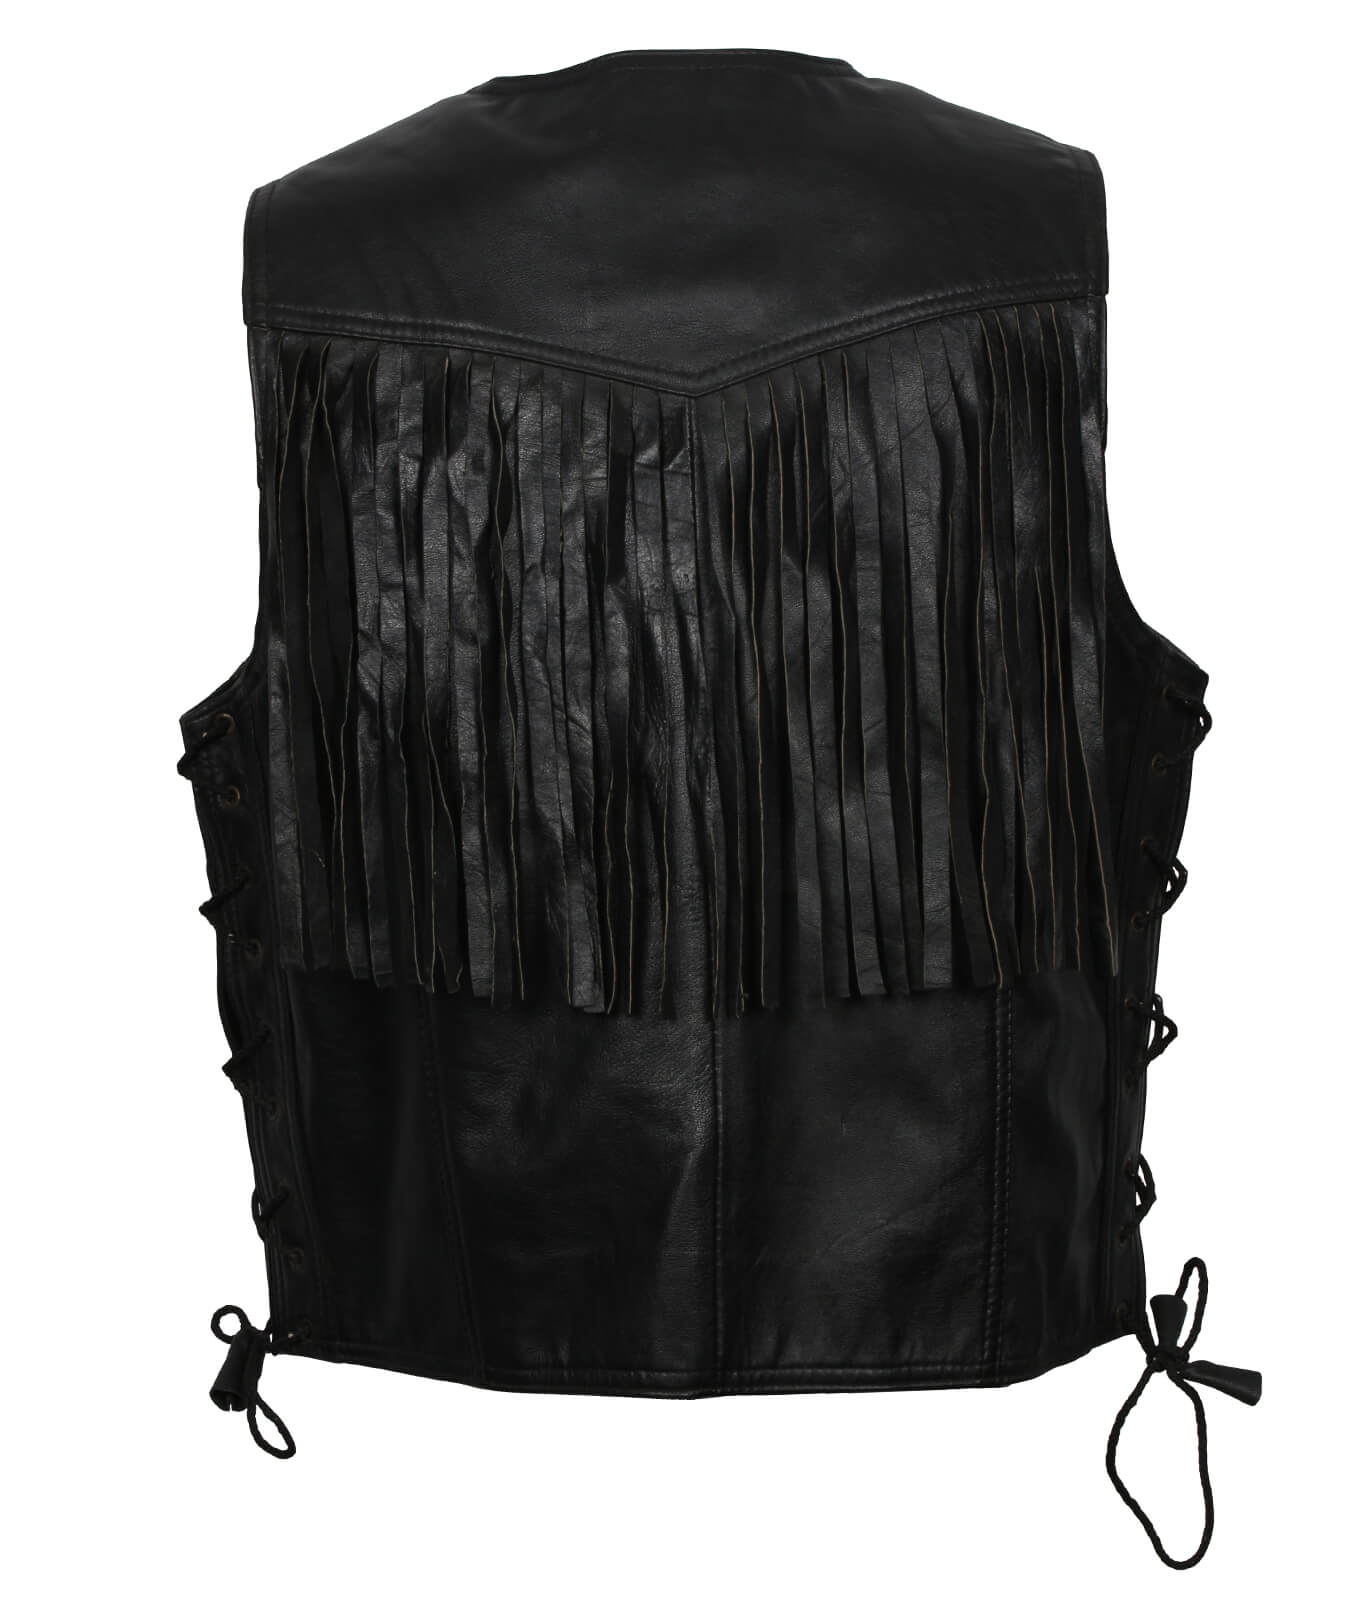 Shop Best Style High Quality Black Cowboy Leather Vest With Fringes For Sale